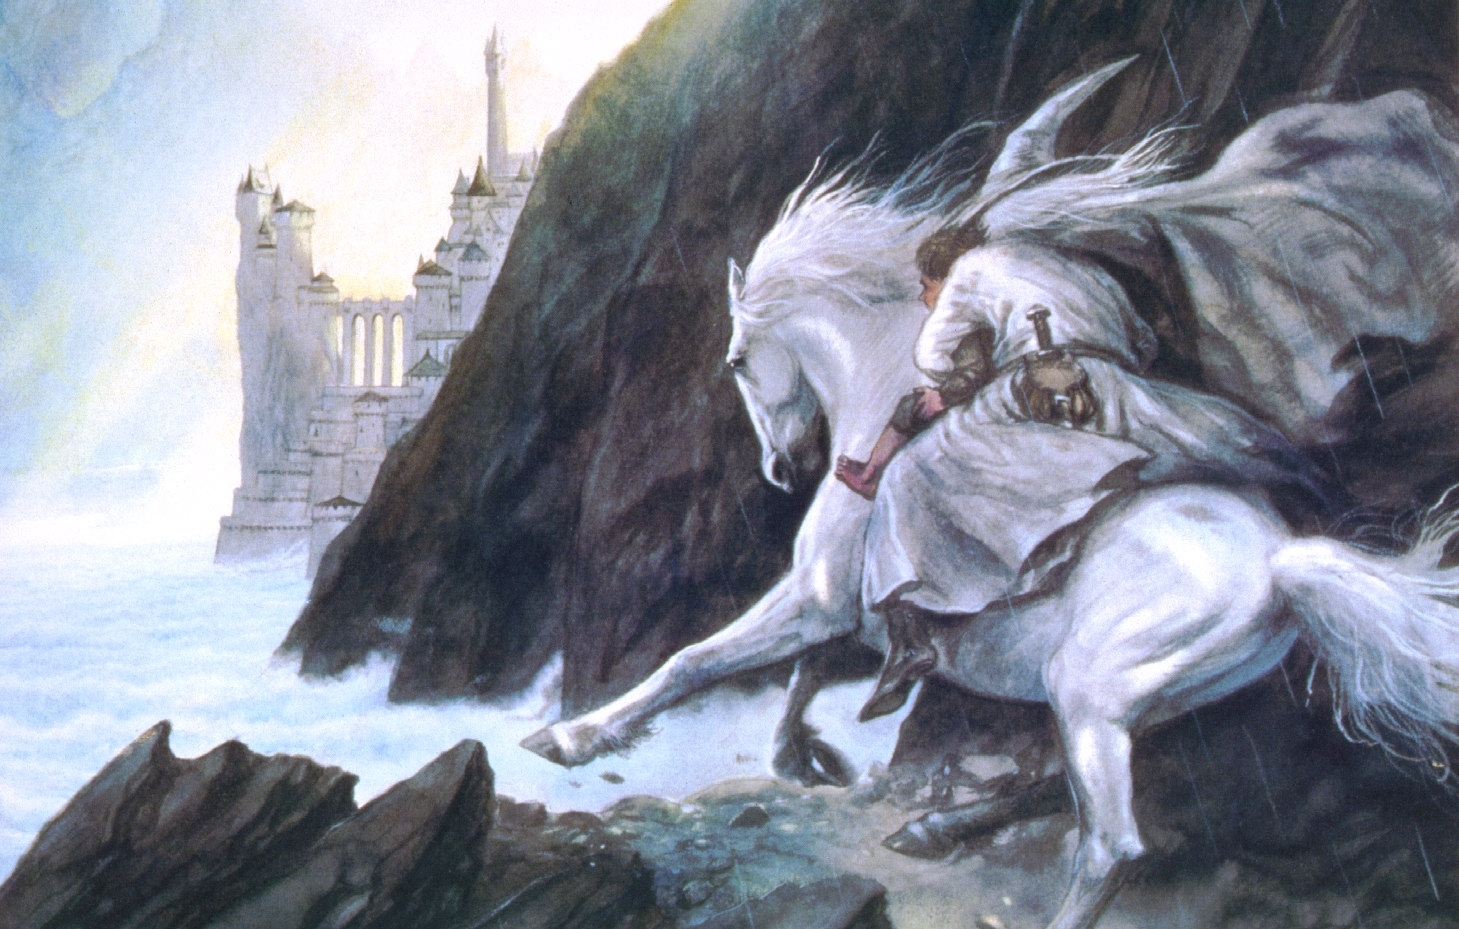 Castles Minas Tirith Gandalf The Lord Of The Rings Lee And John Howe Lotr